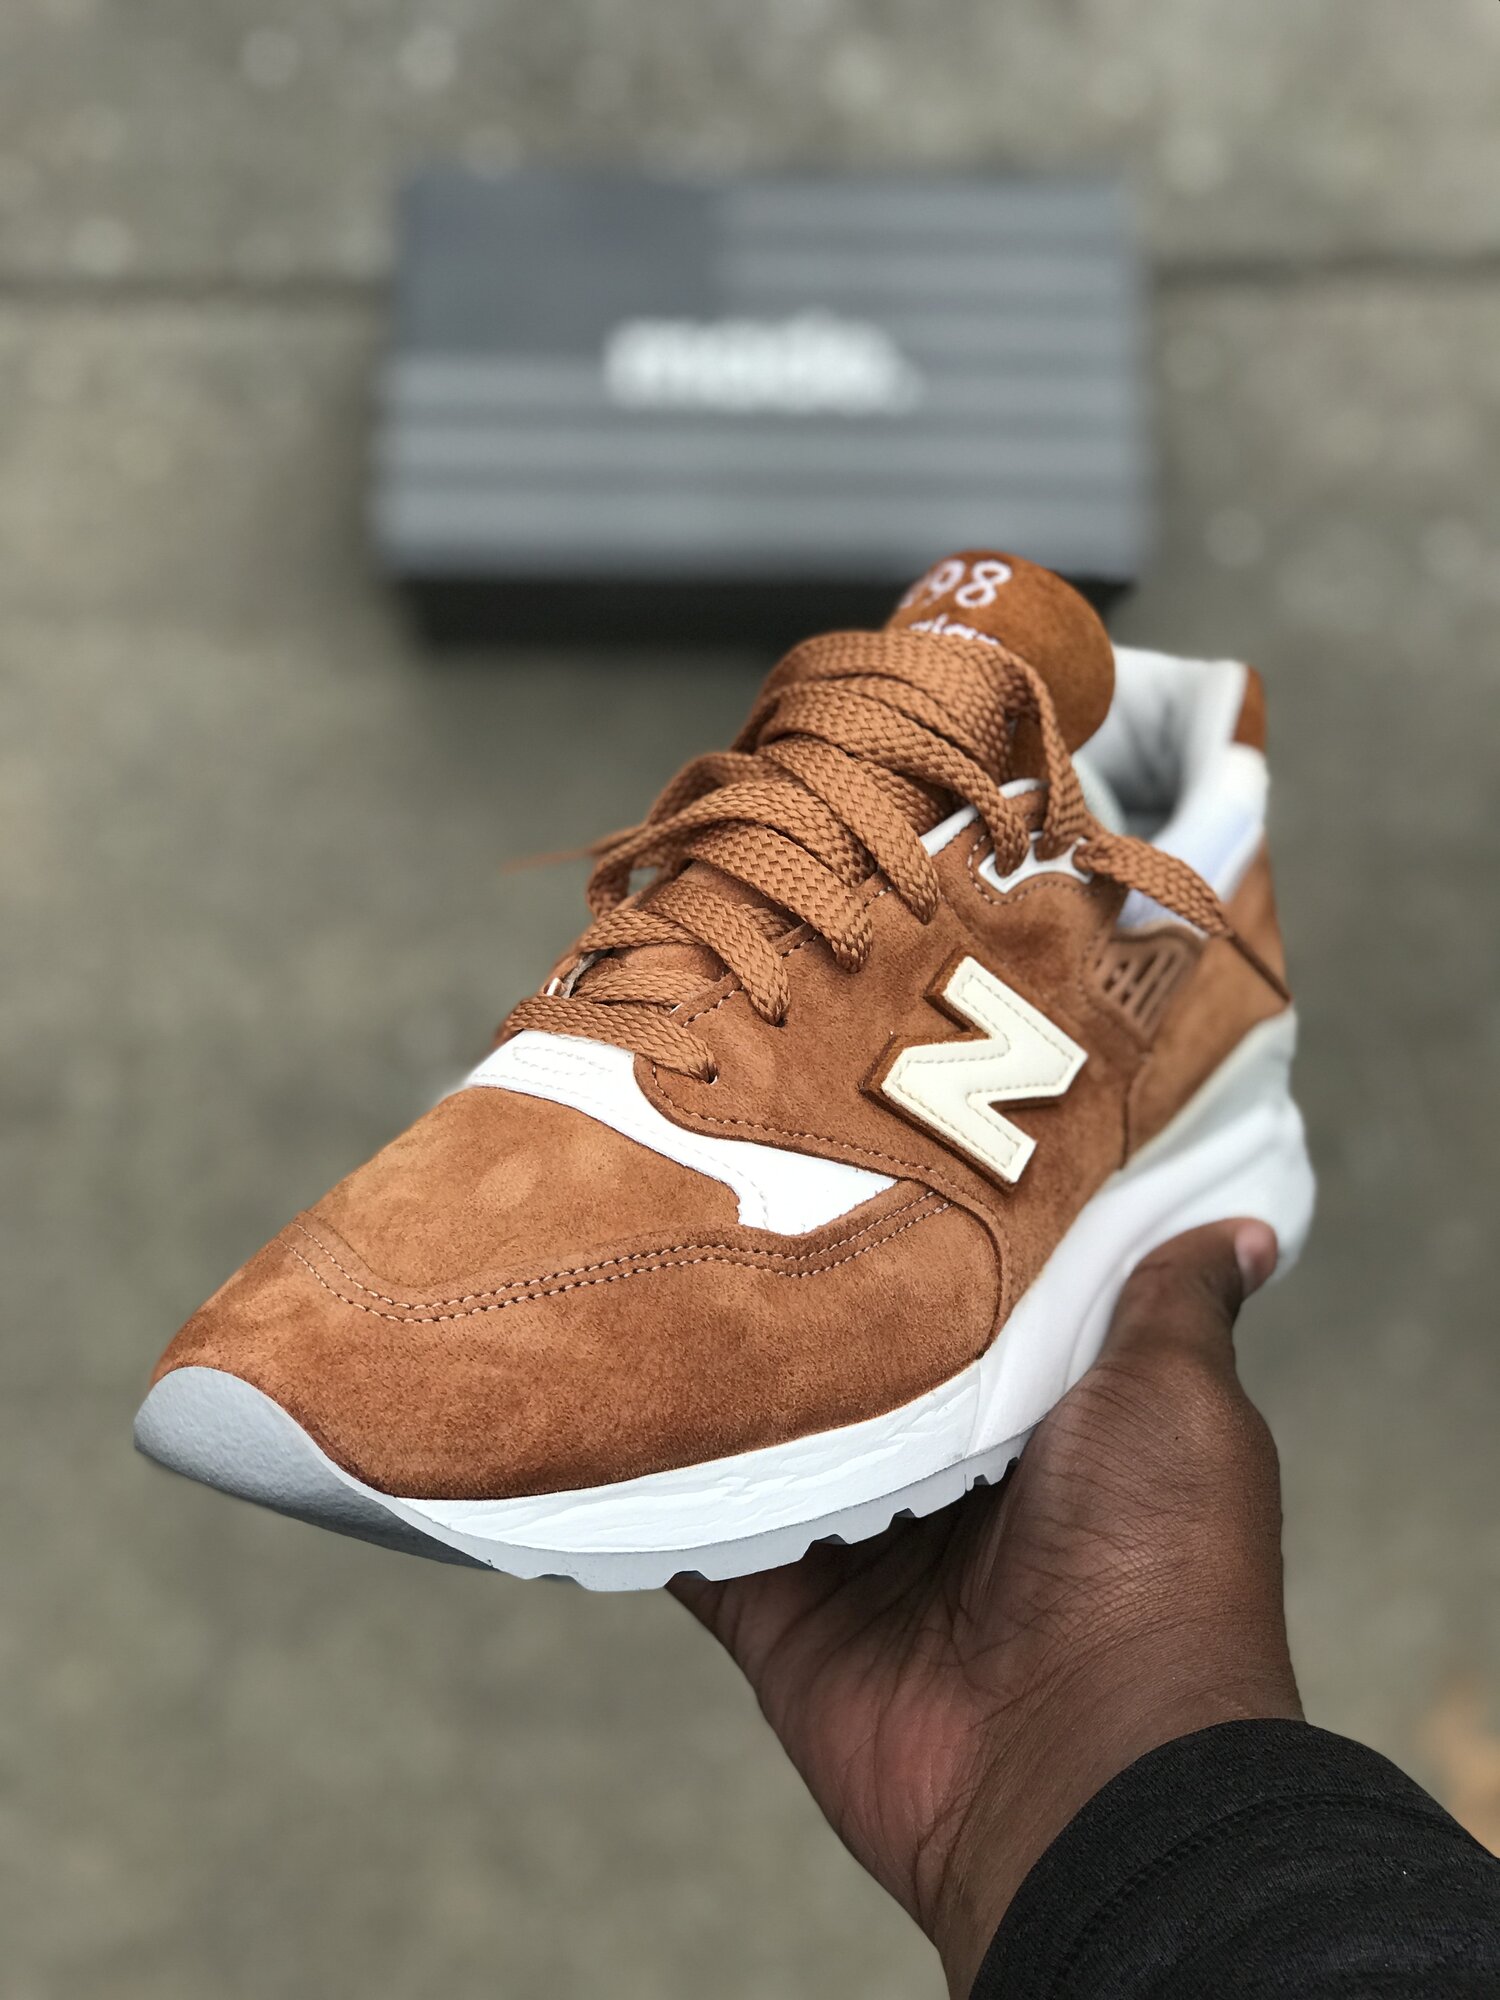 New Balance 998 "Brown Sugar" — Sneaker News Release Guides The Retro Insider